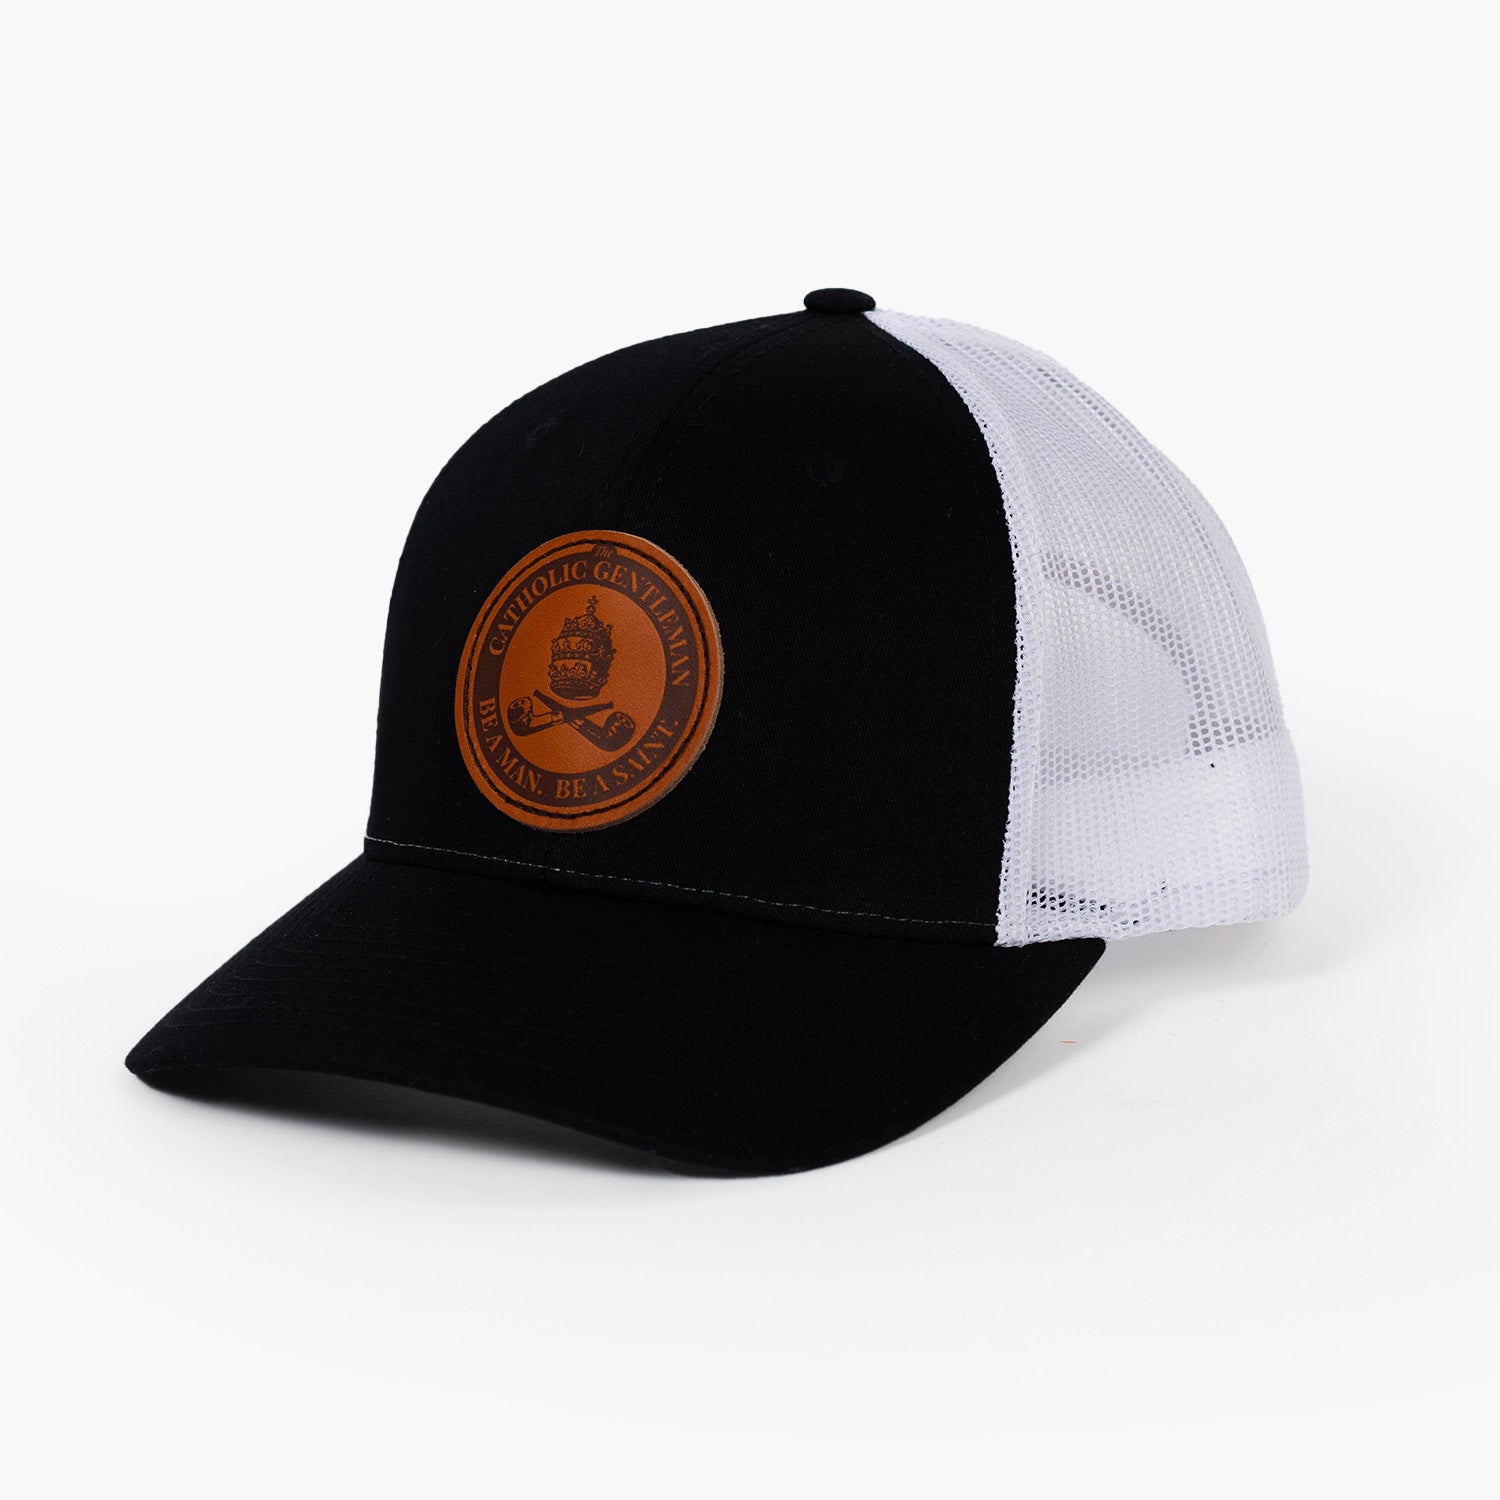 Leather Patch Hat - Black/White – The Catholic Gentleman Store